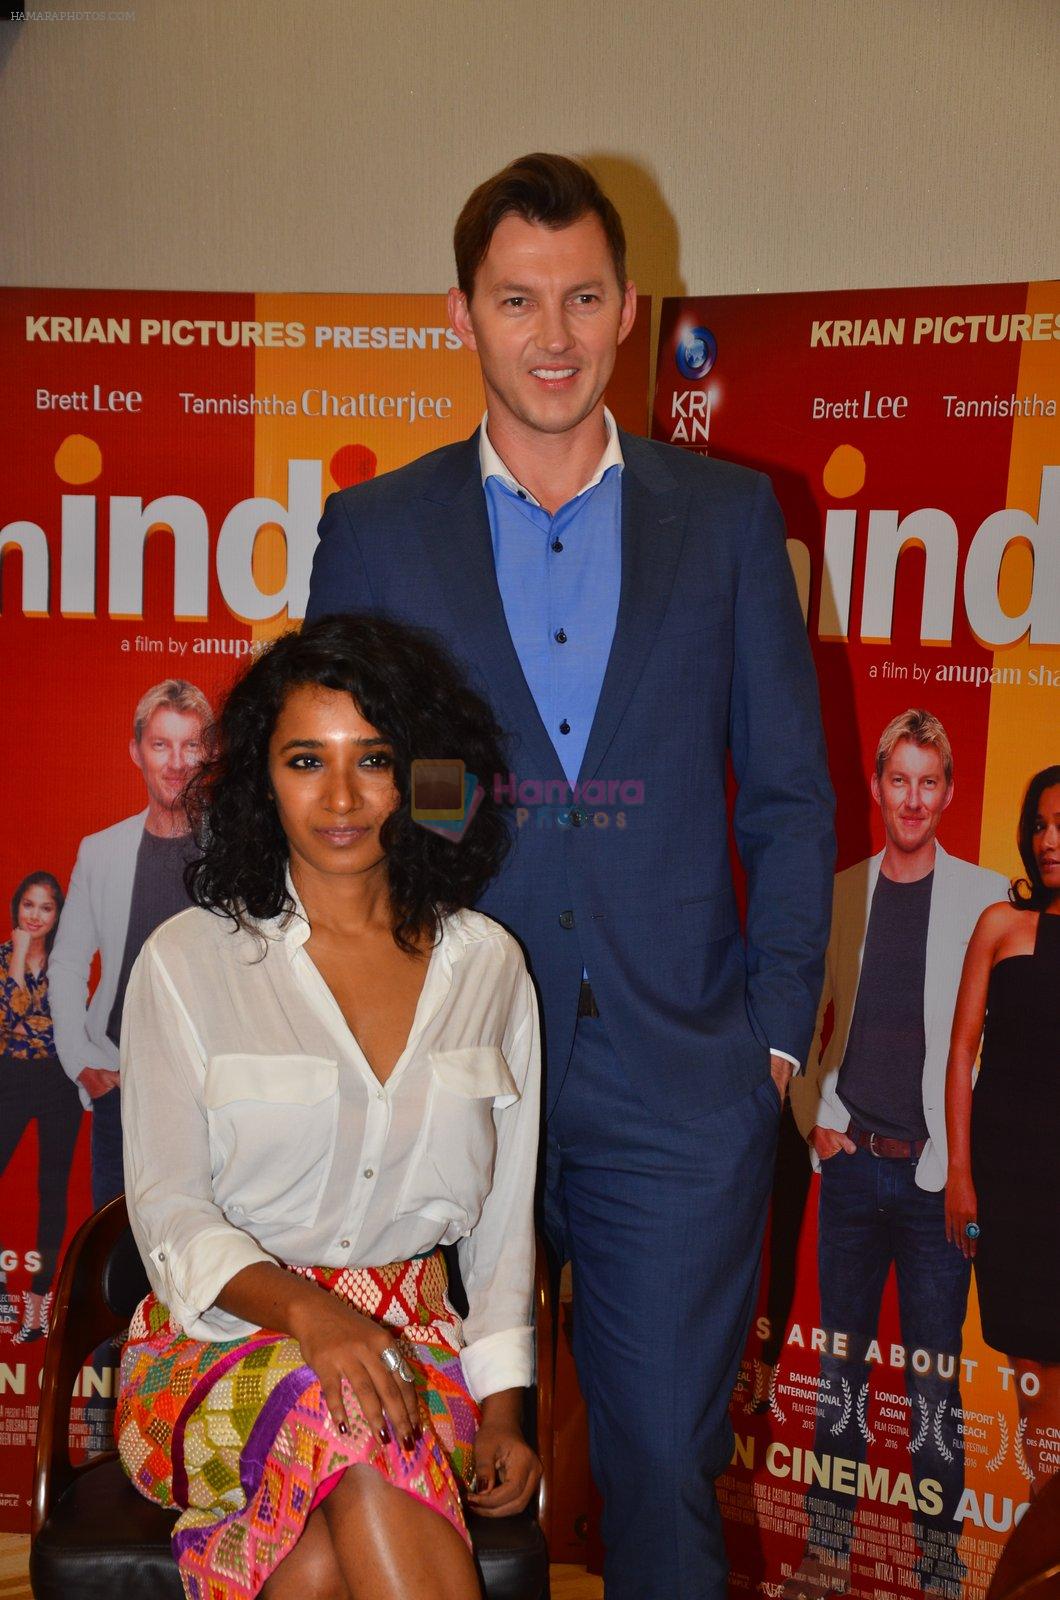 Brett Lee and Tannishtha Chatterjee promote their upcoming film Unindian on 26th July 2016